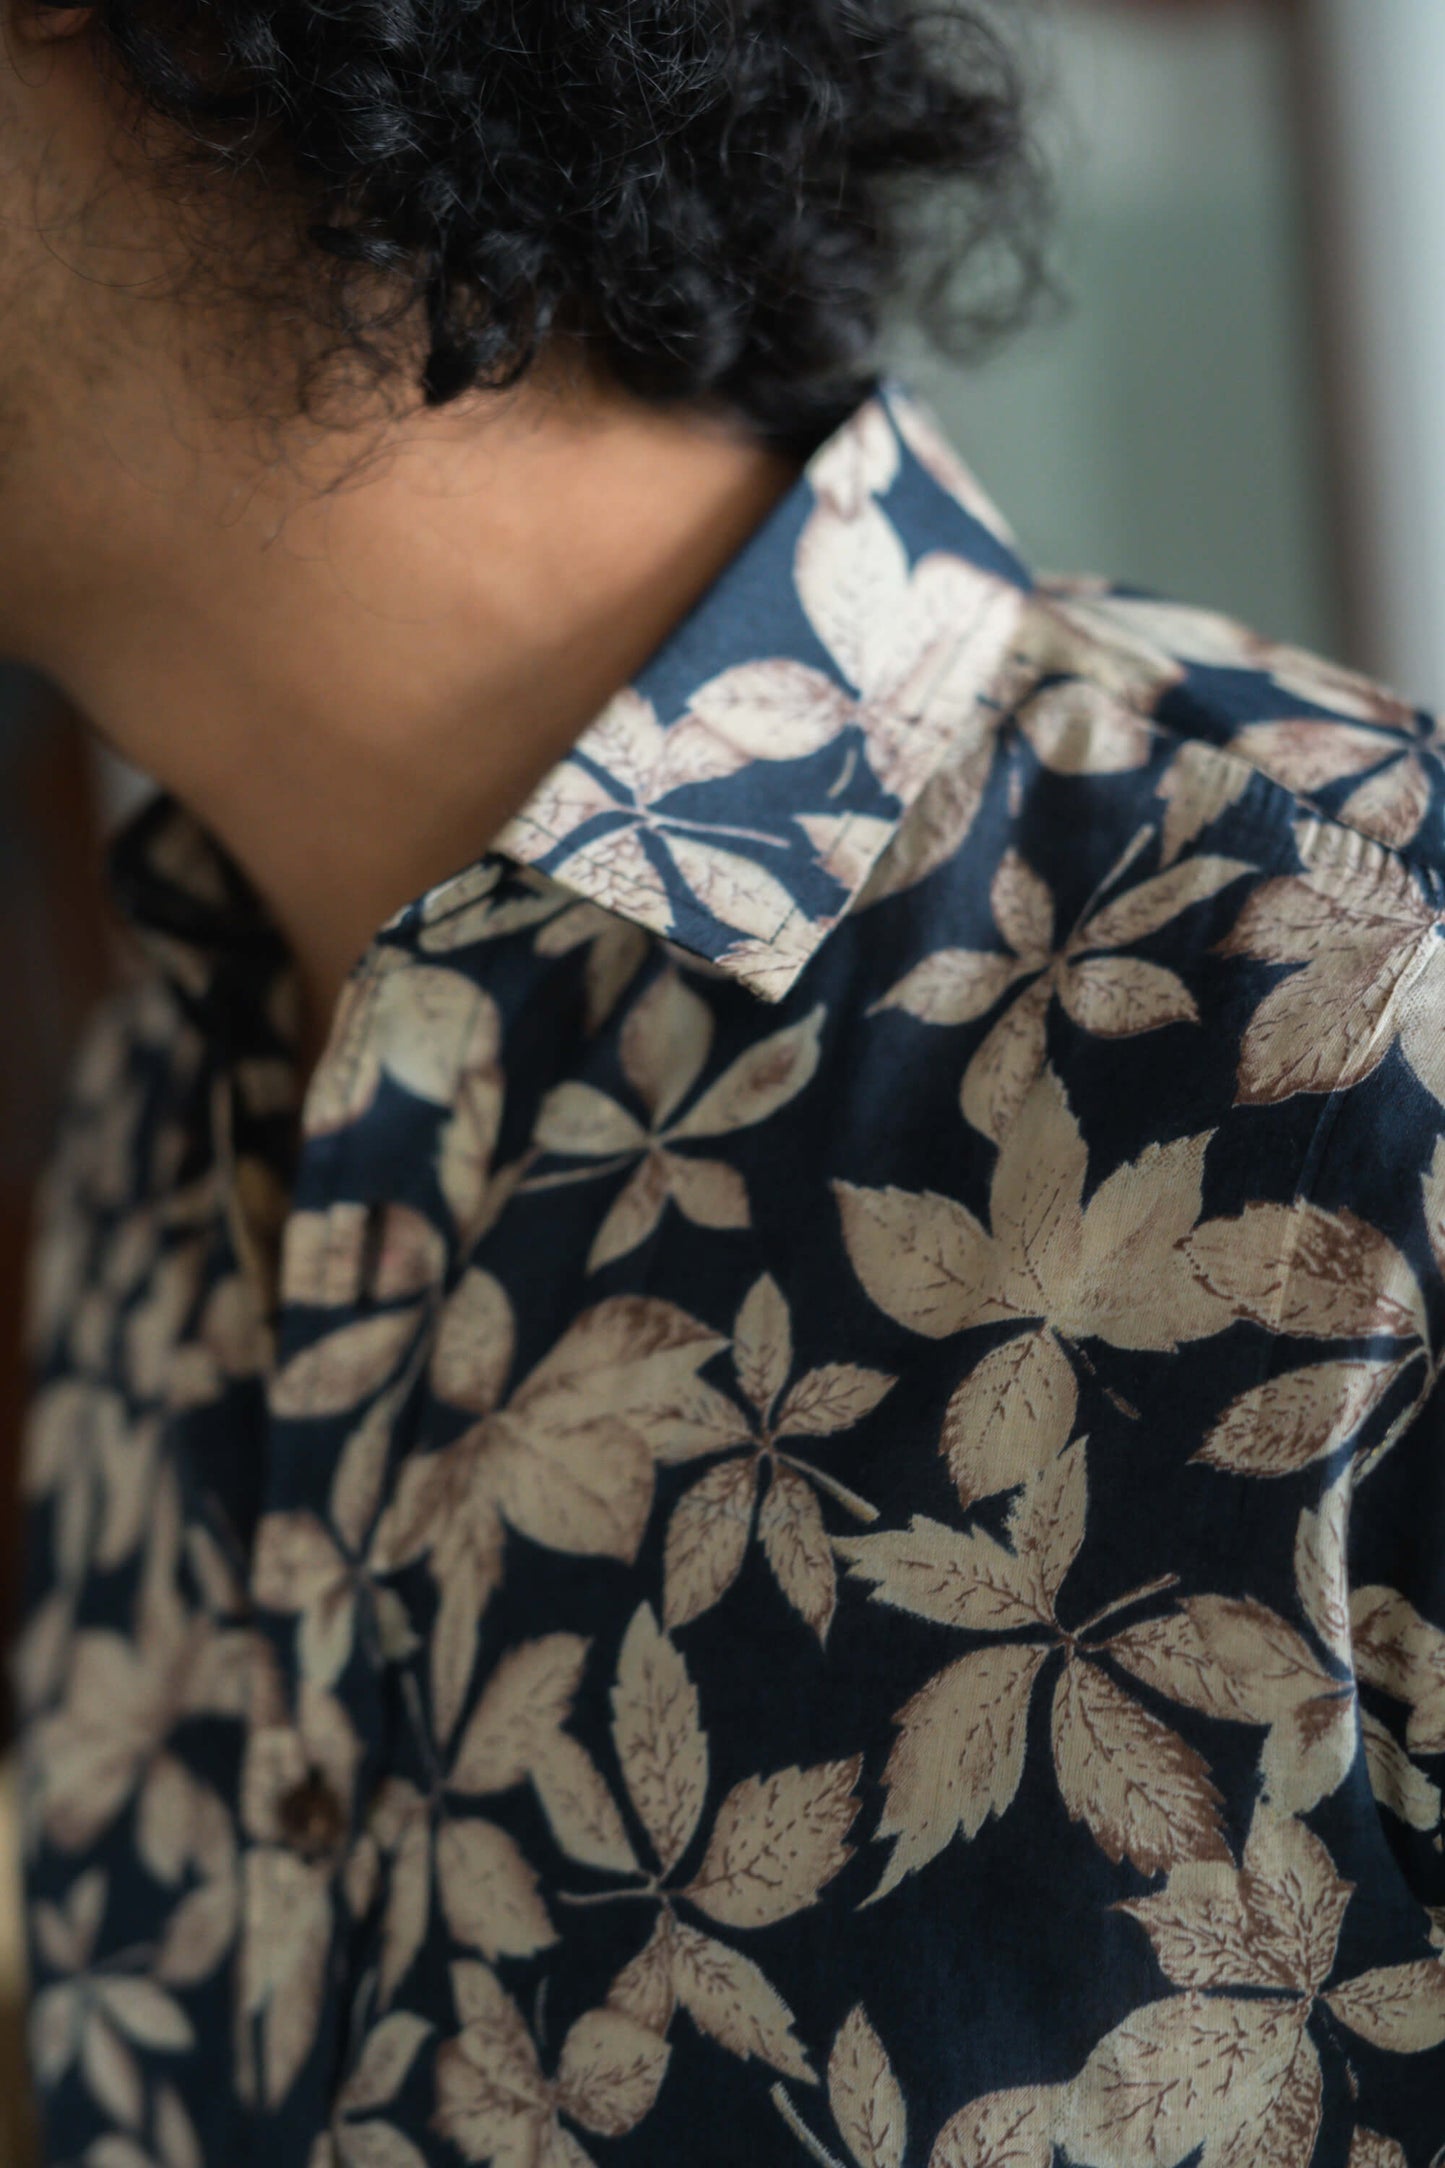 The Very Dark Blue All-Over Floral Print Shirt (Half Sleeves)